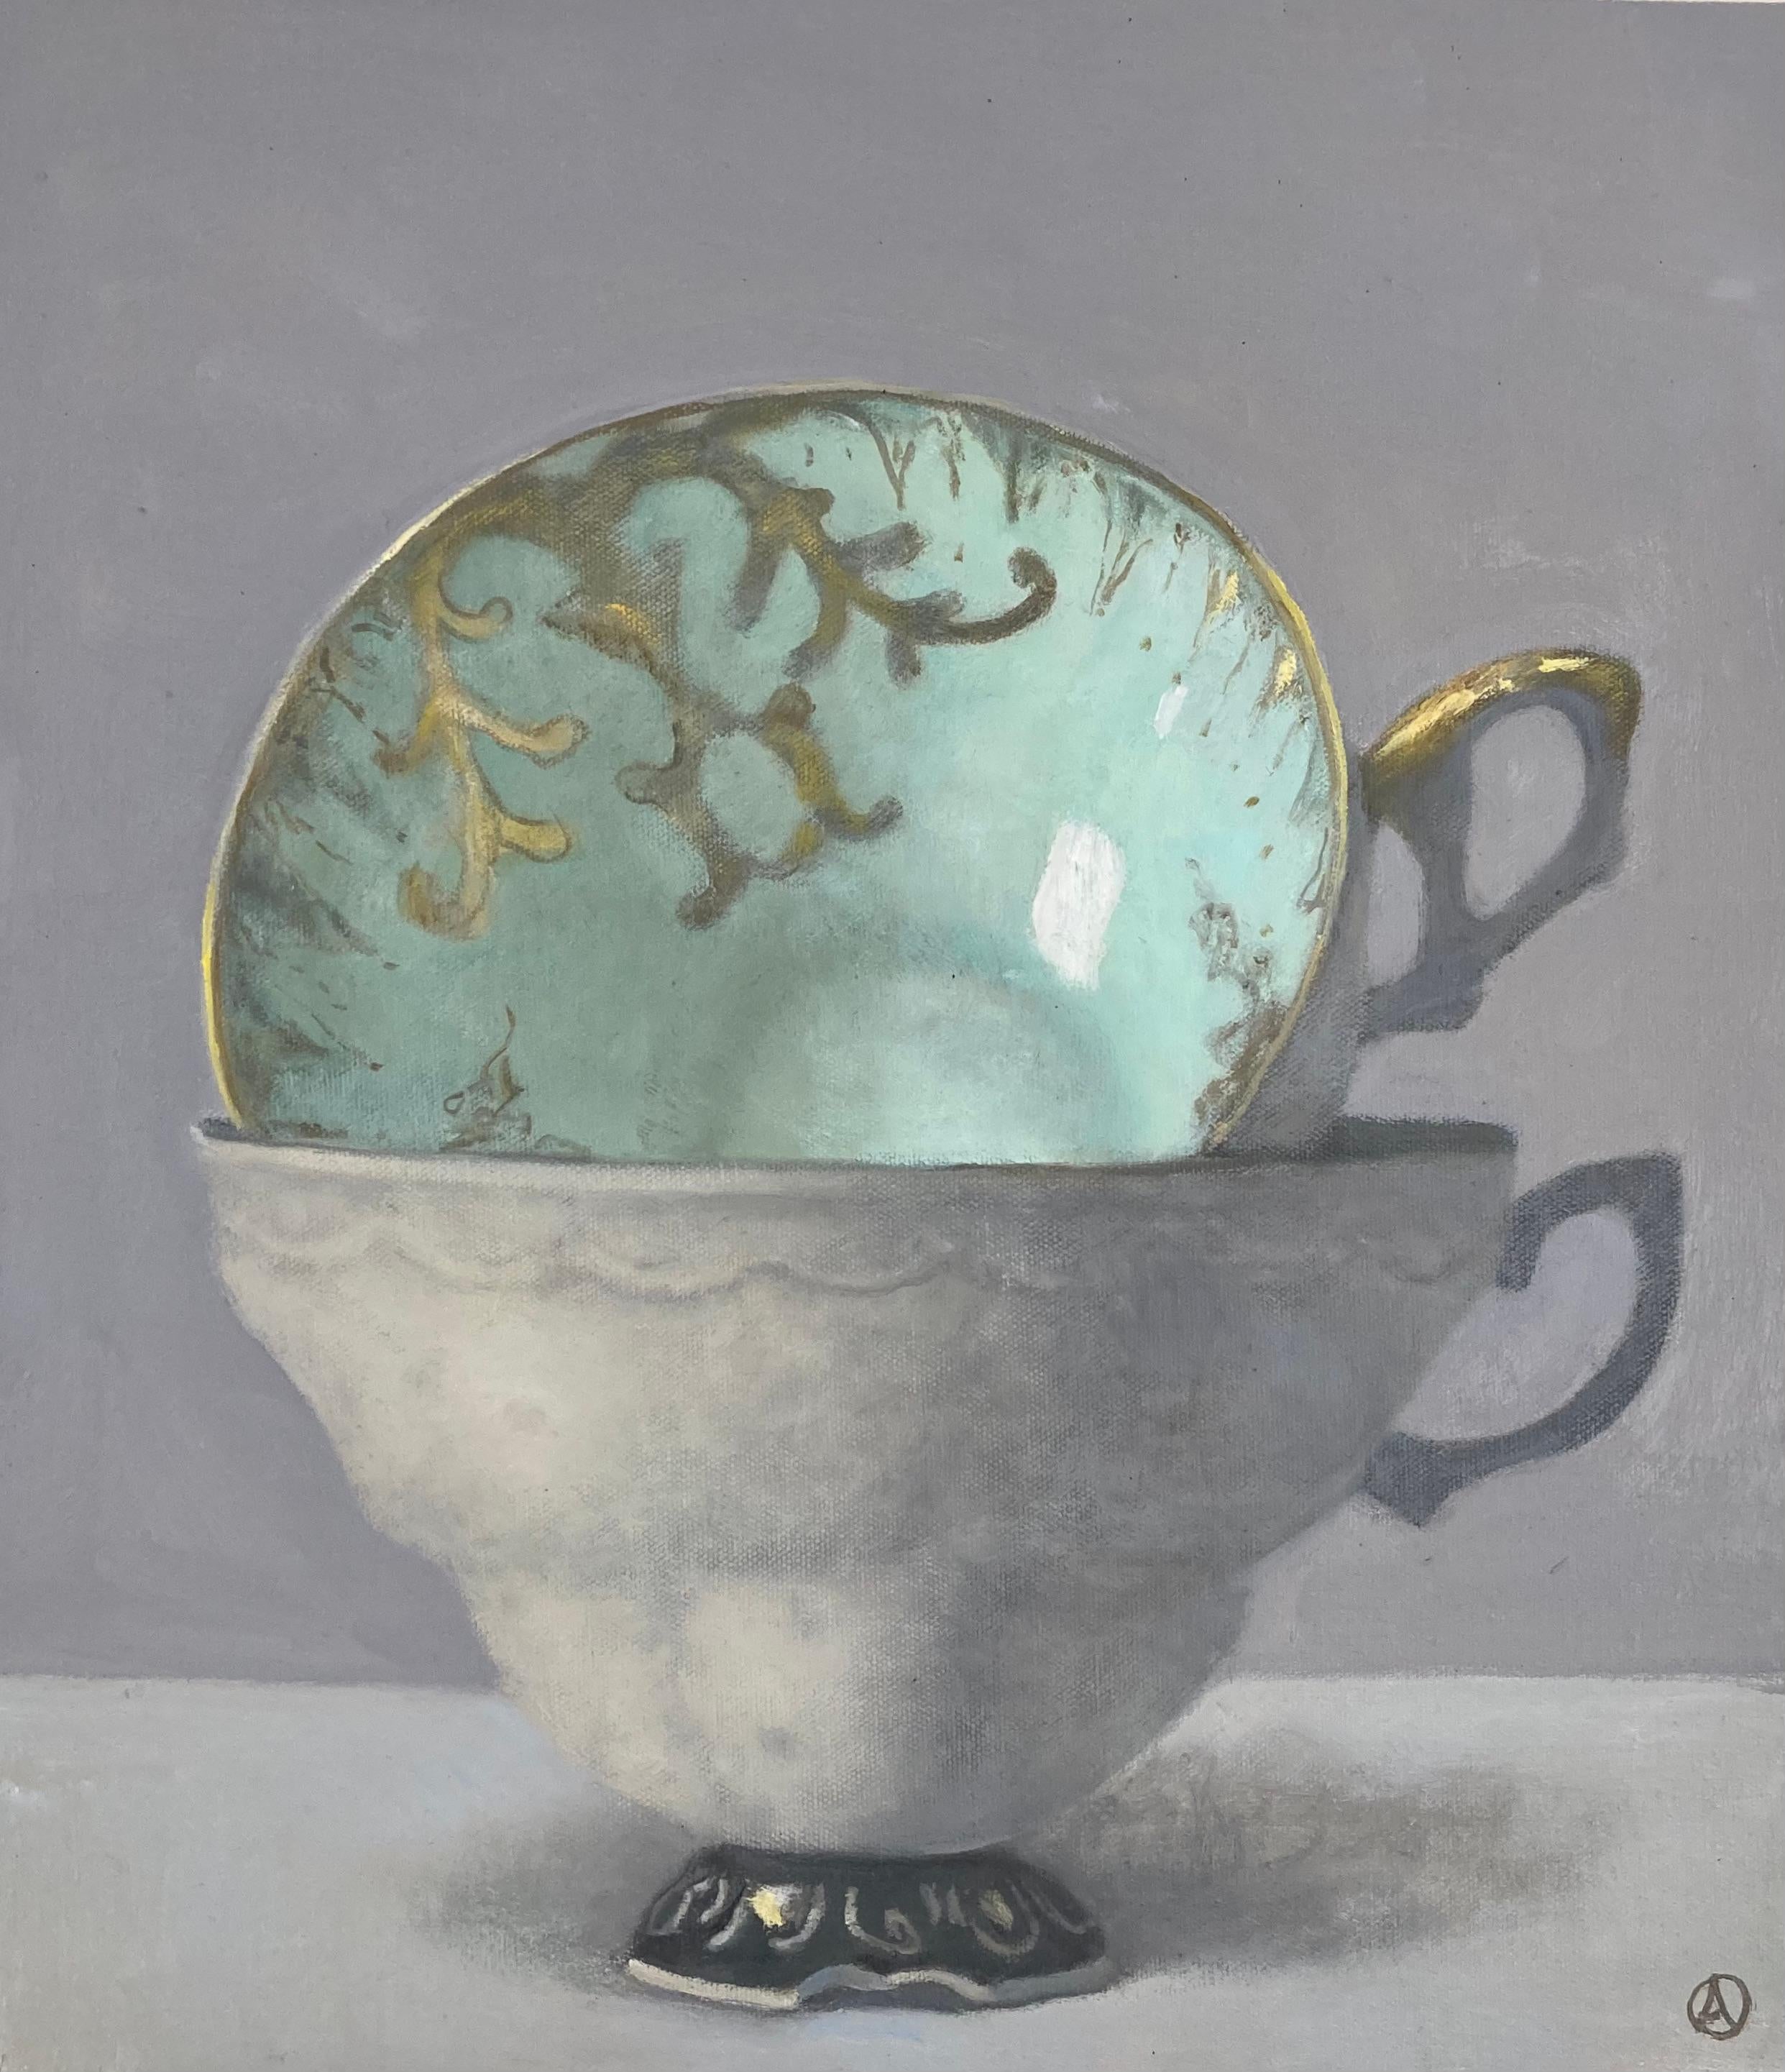 Olga Antonova Still-Life Painting - "Two Stacked Cups in Green, White and Gold on a Gray Ground"